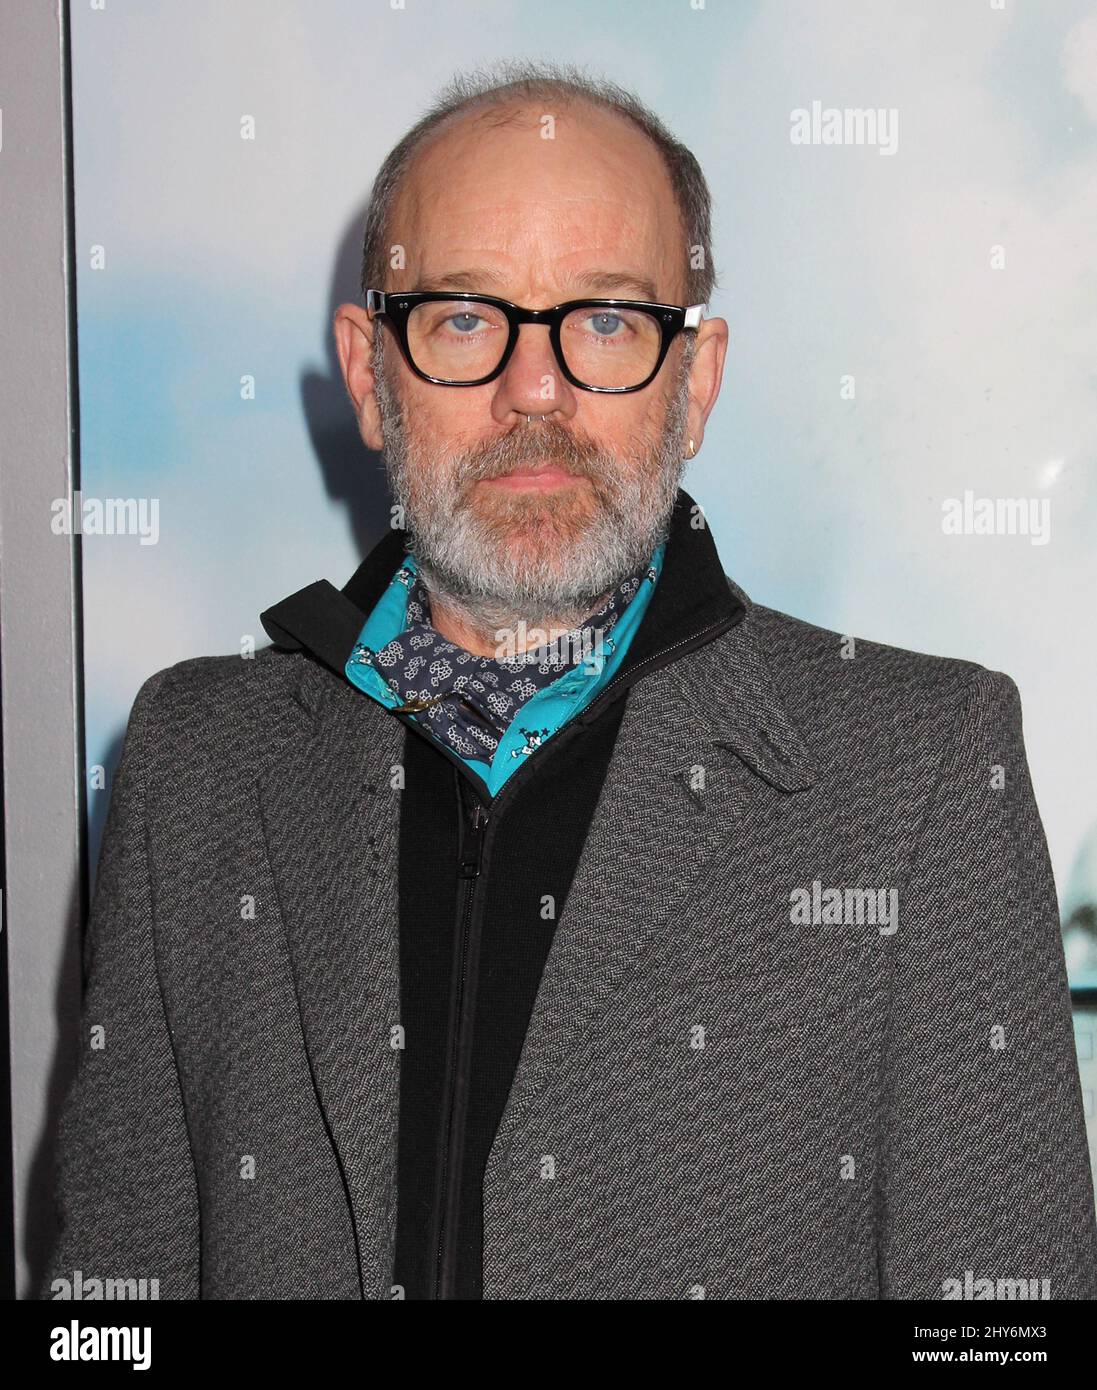 Michael Stipe attending the Chappie premiere in New York Stock Photo